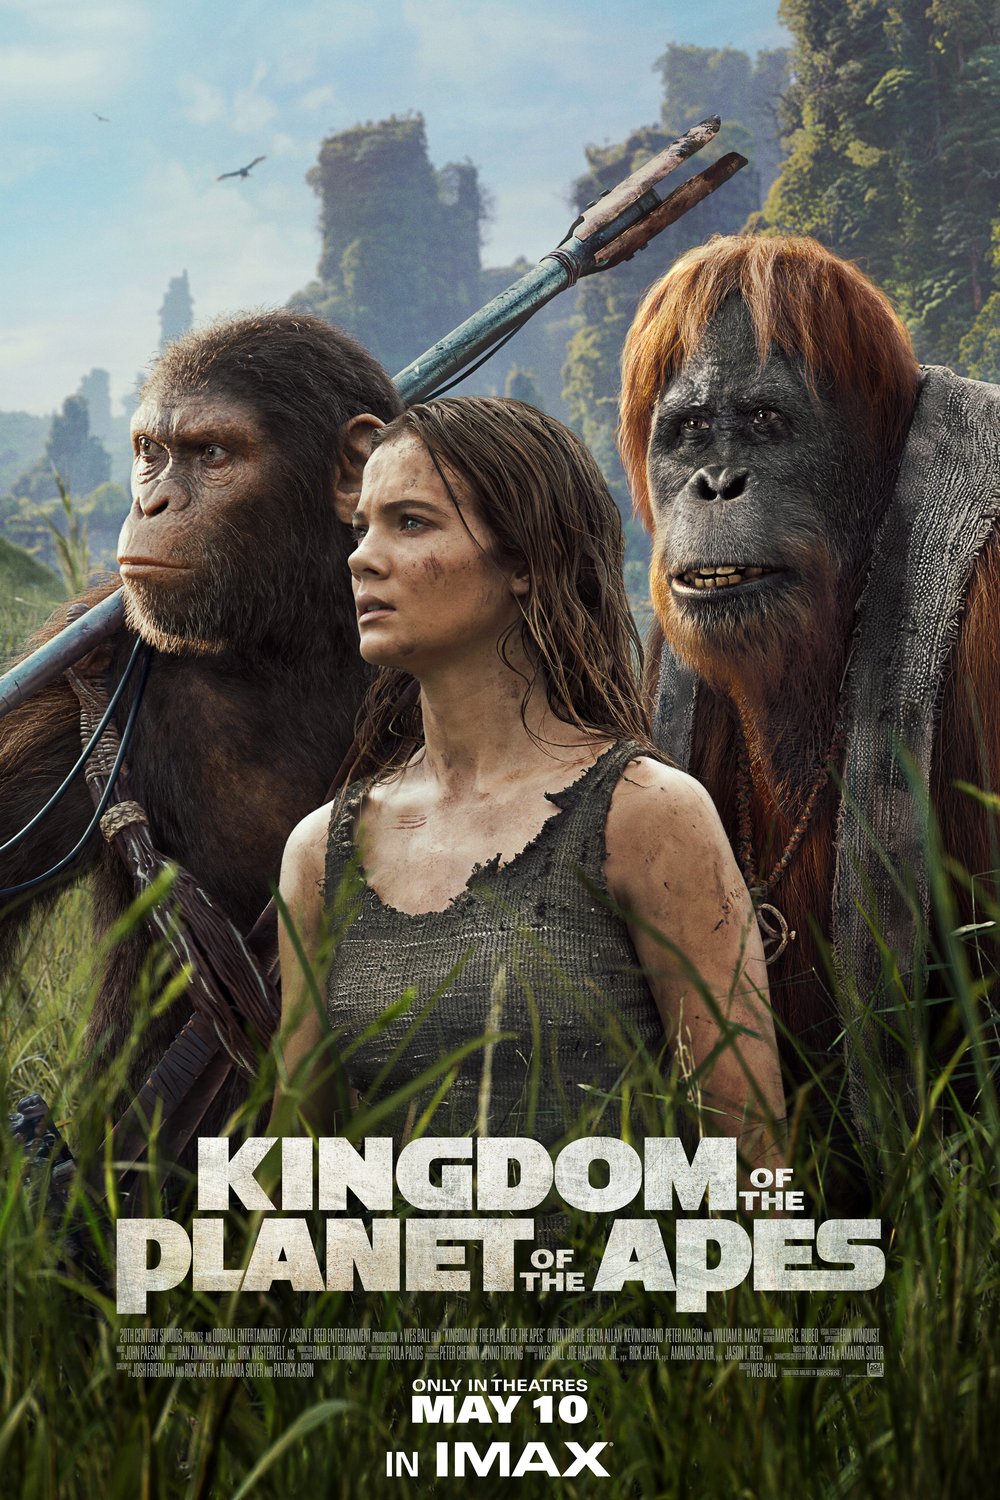 L'affiche du film Kingdom of the Planet of the Apes